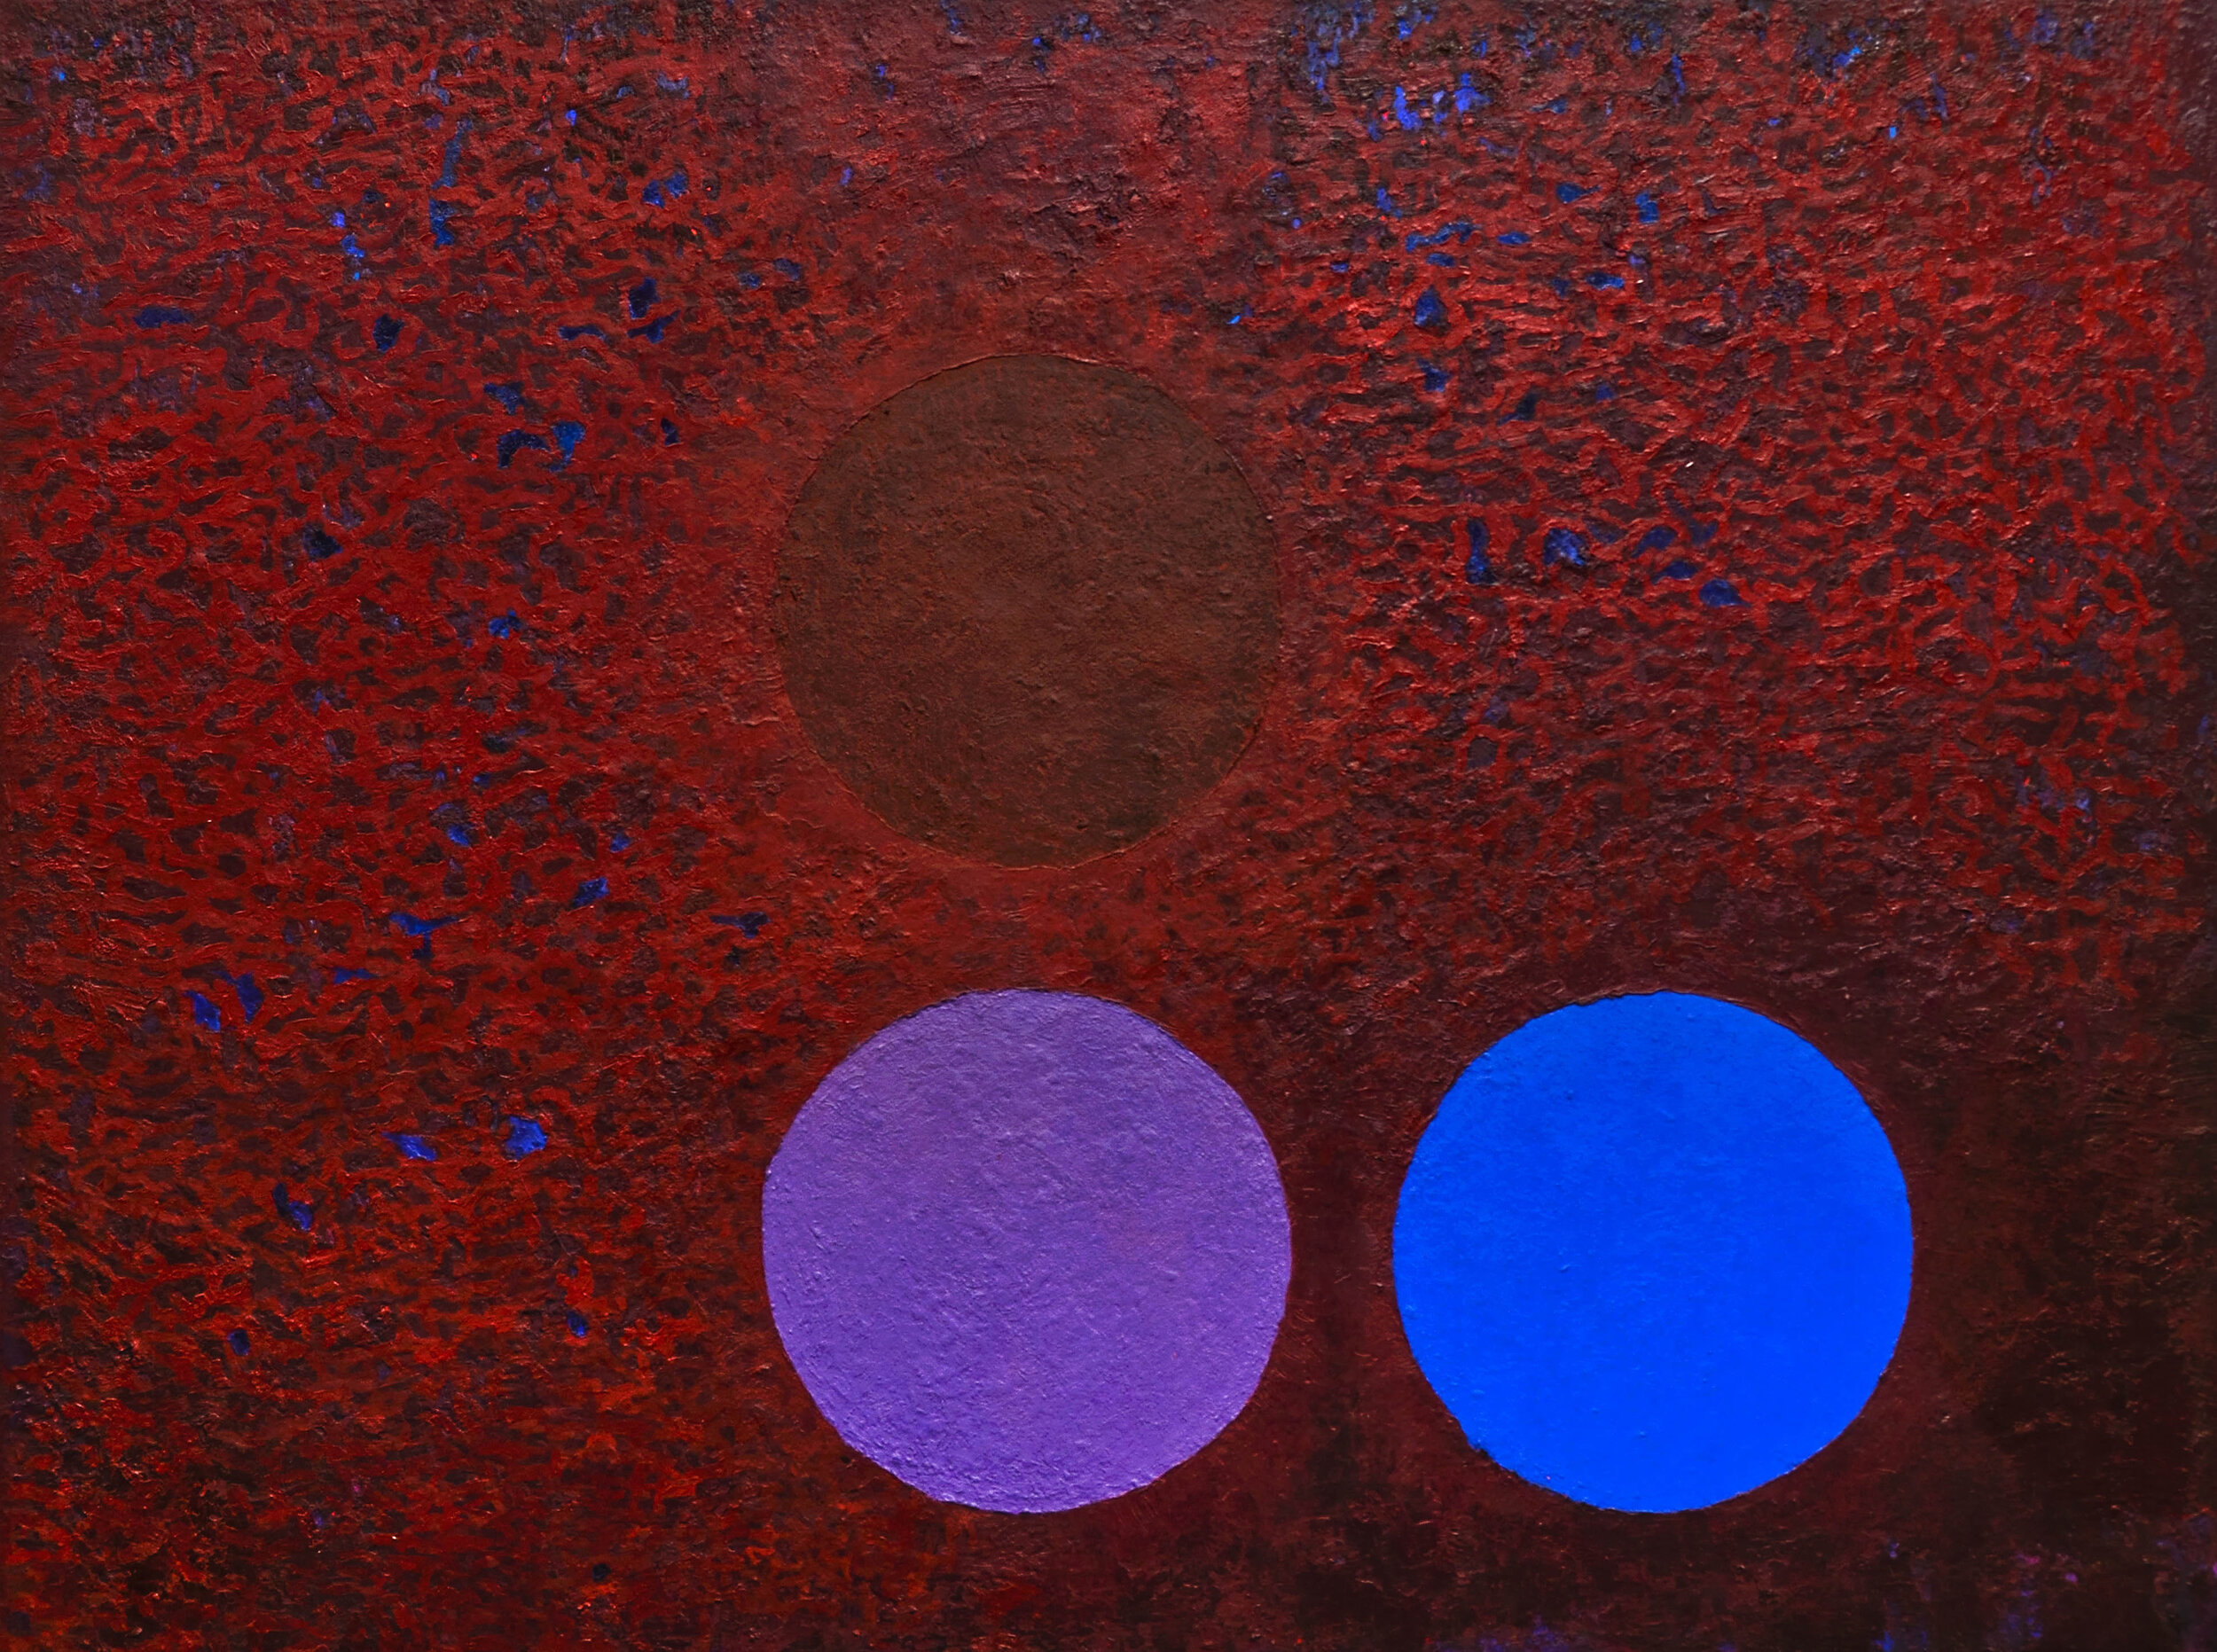 Untitled, 2012, Oil on Canvas, 36" x 48"